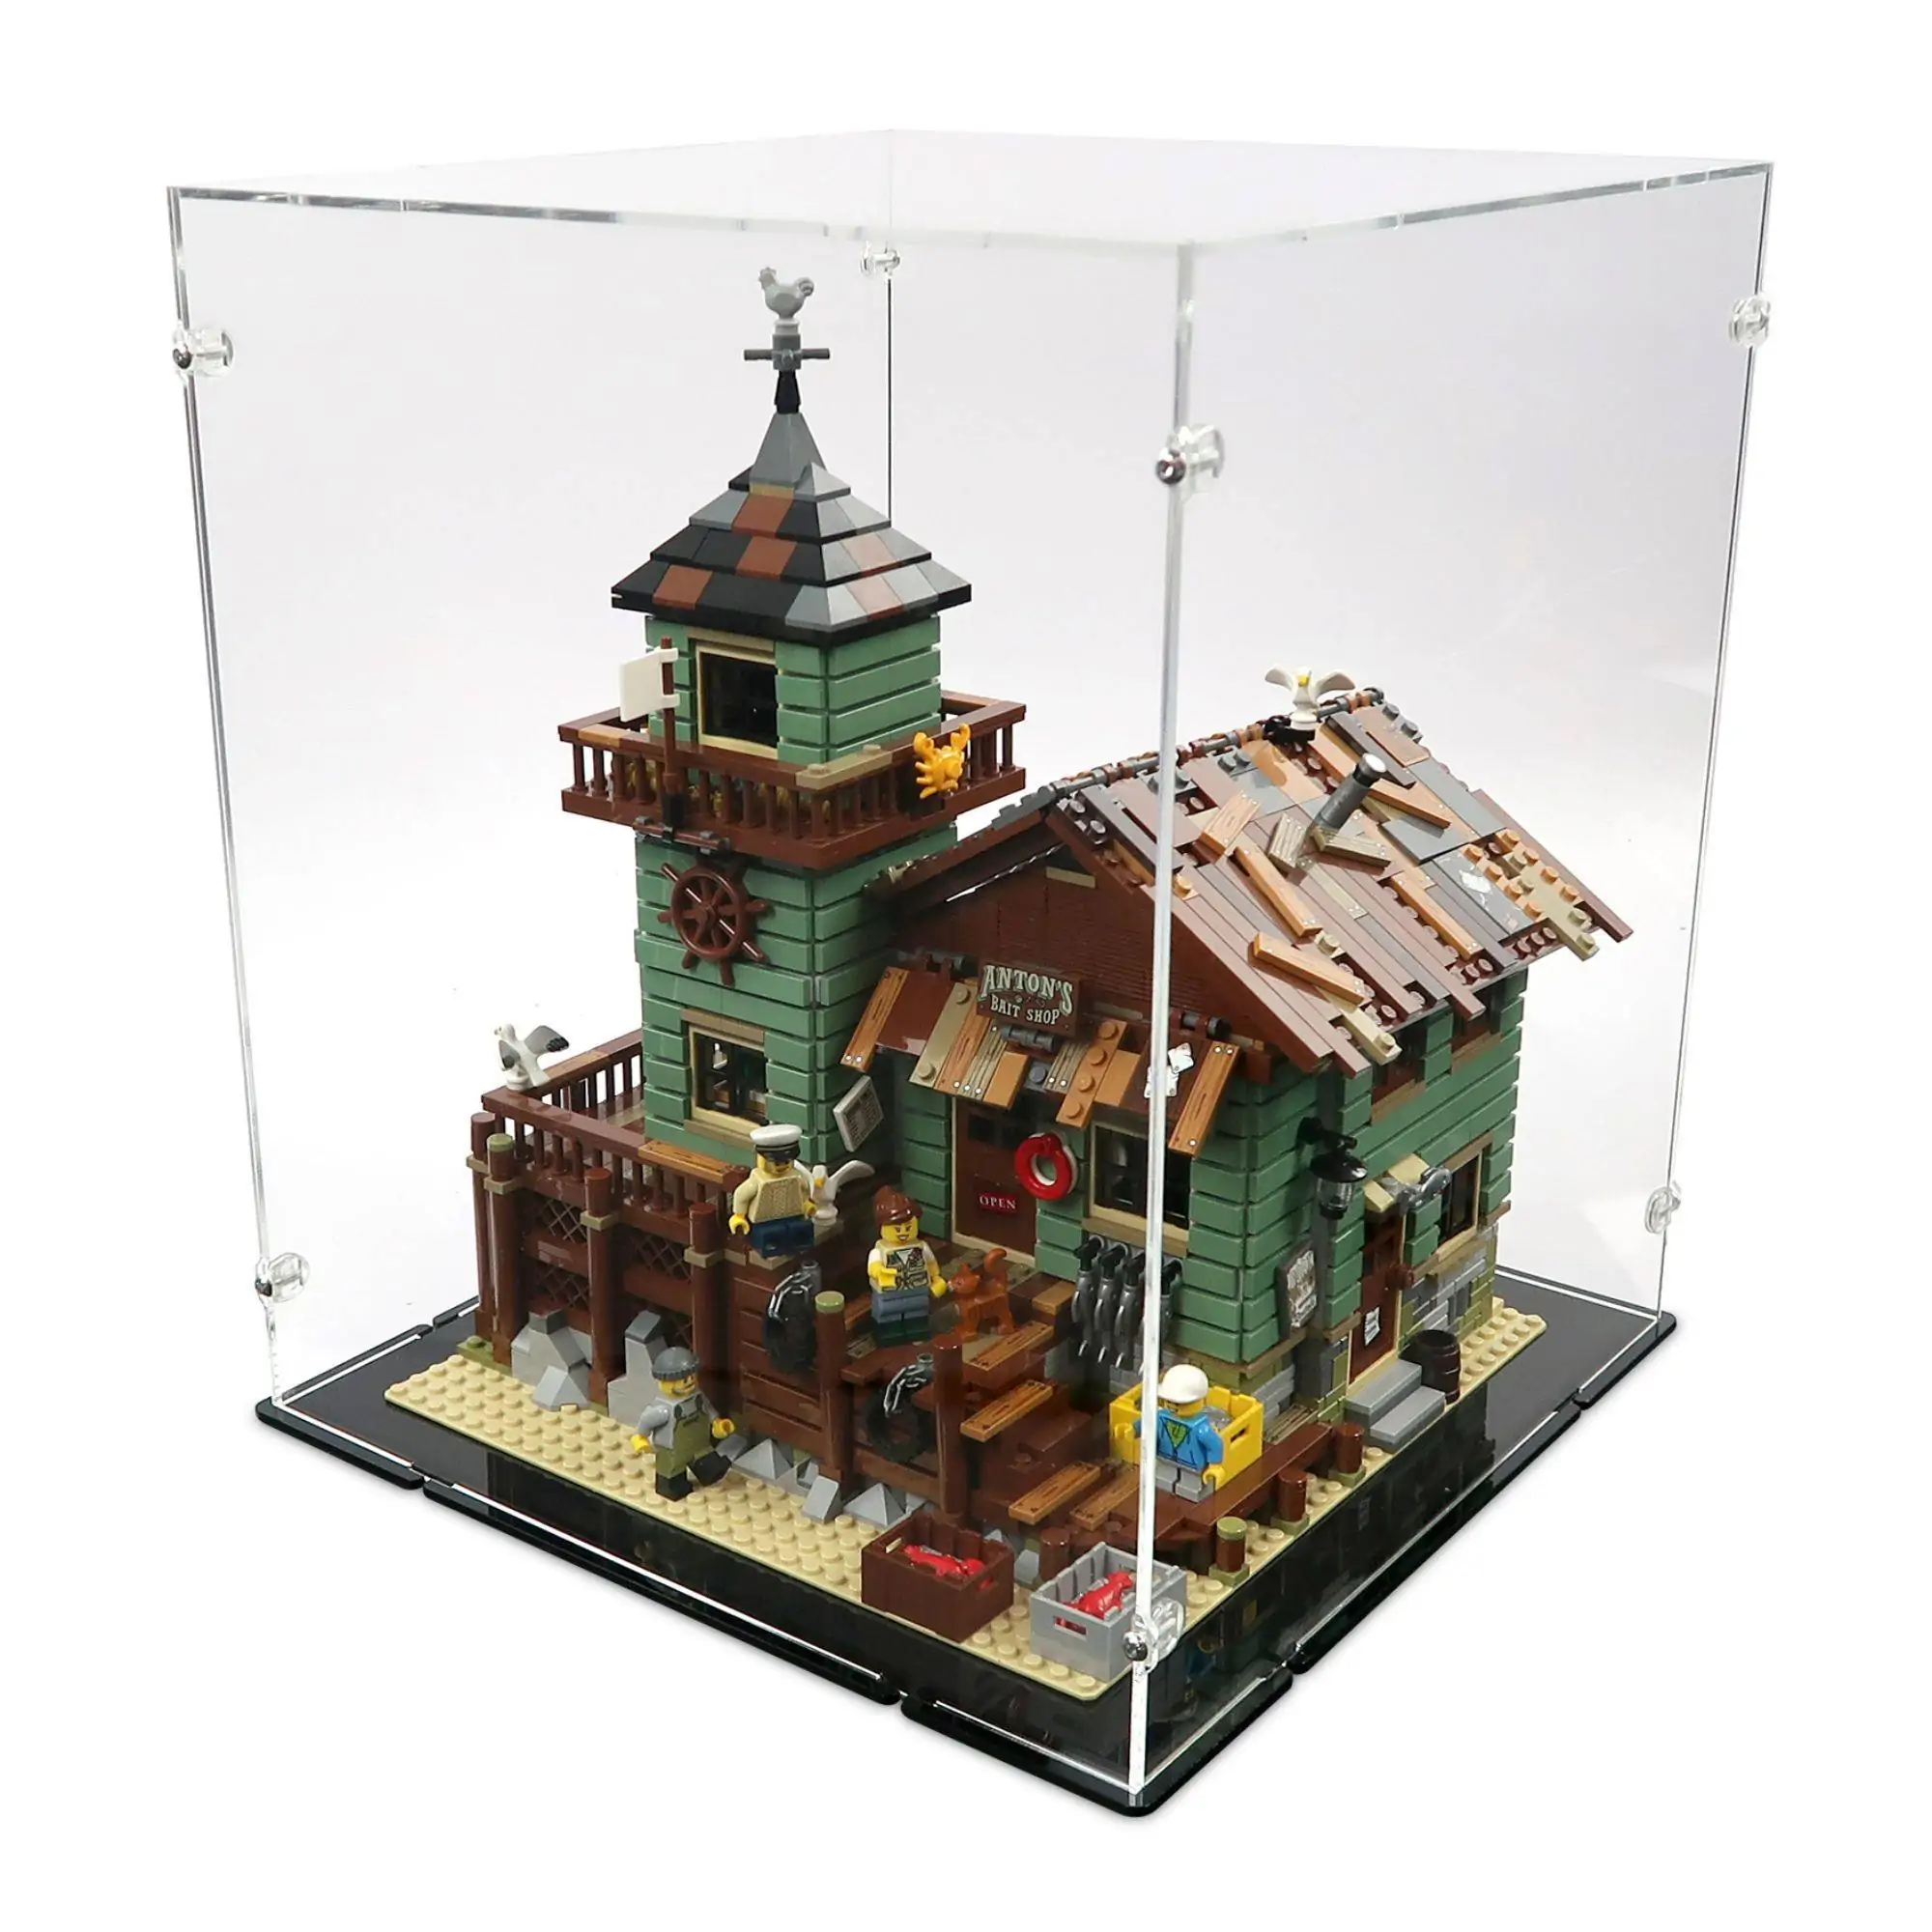 21310 Old Fishing Store – Official Pictures & Description